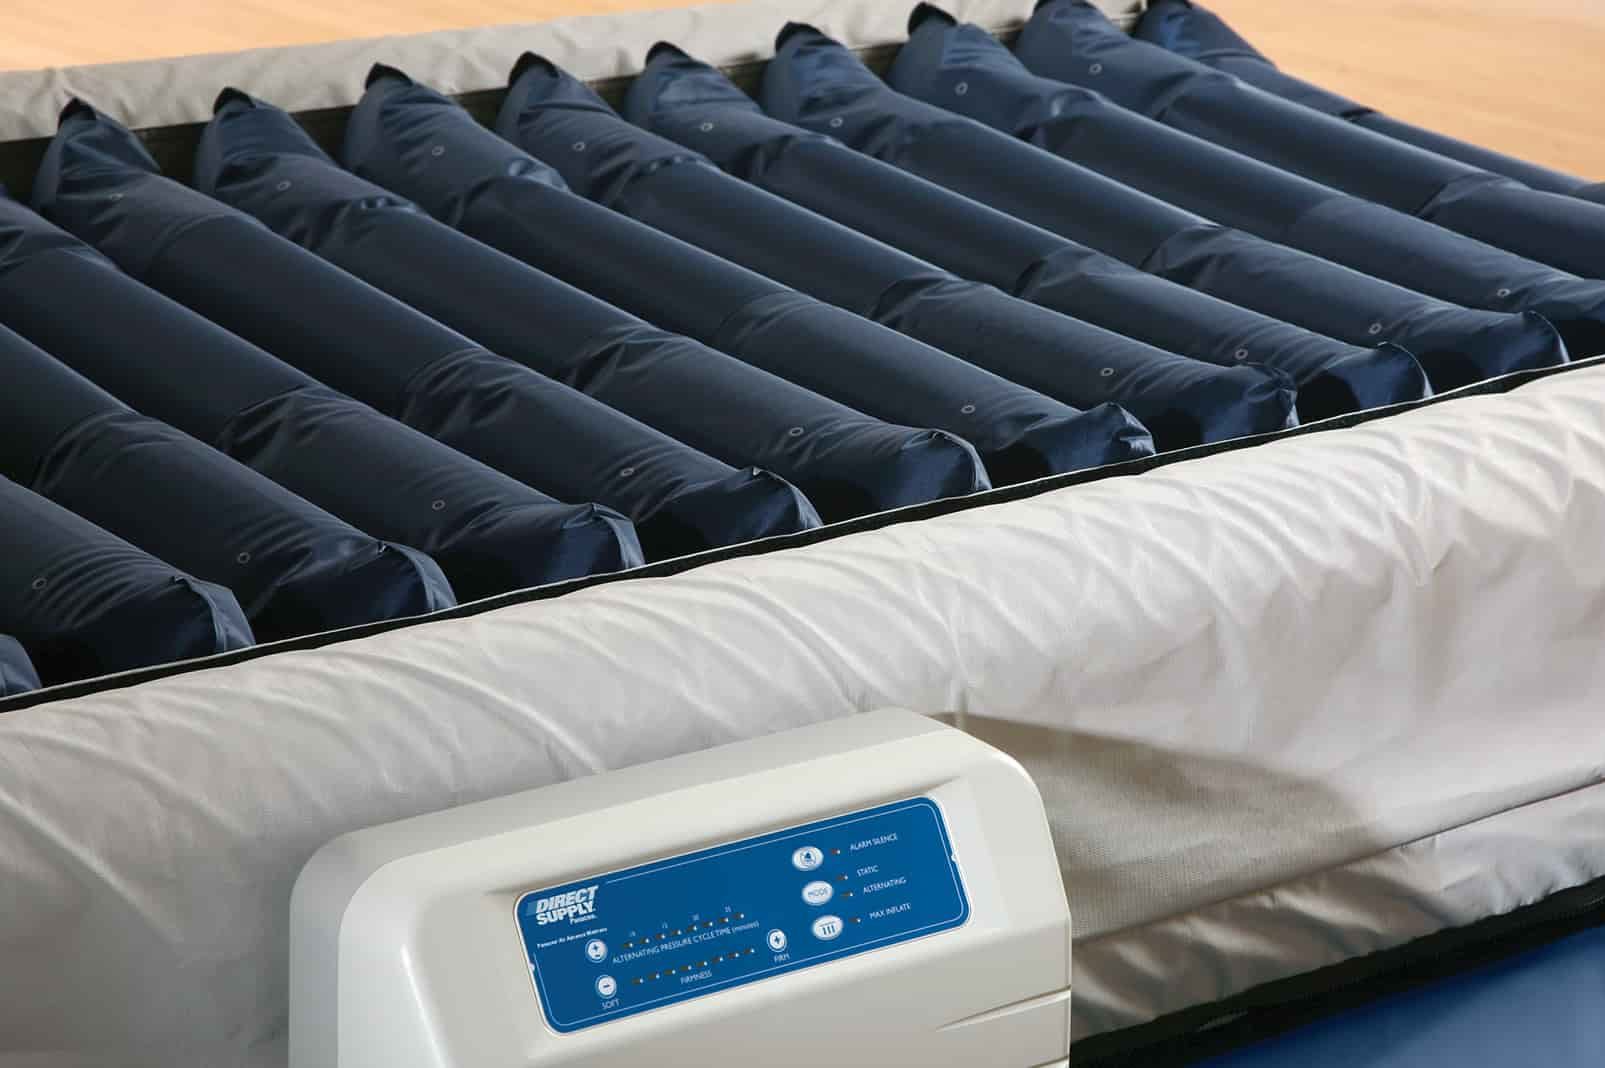 official hospital bed wide air mattress with trapeze